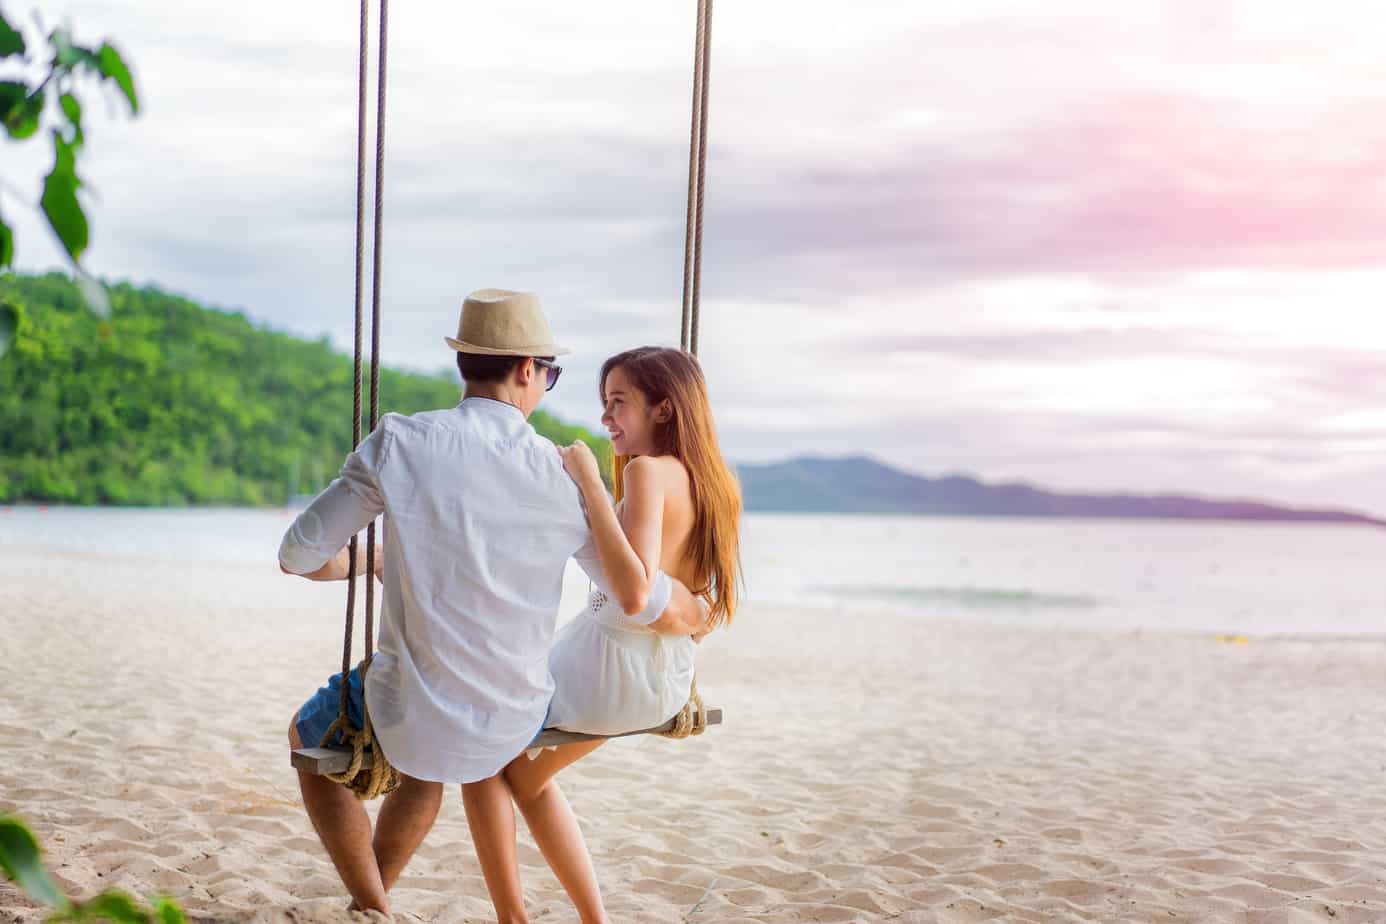 A couple sits on a swing smiling at each other near the ocean.